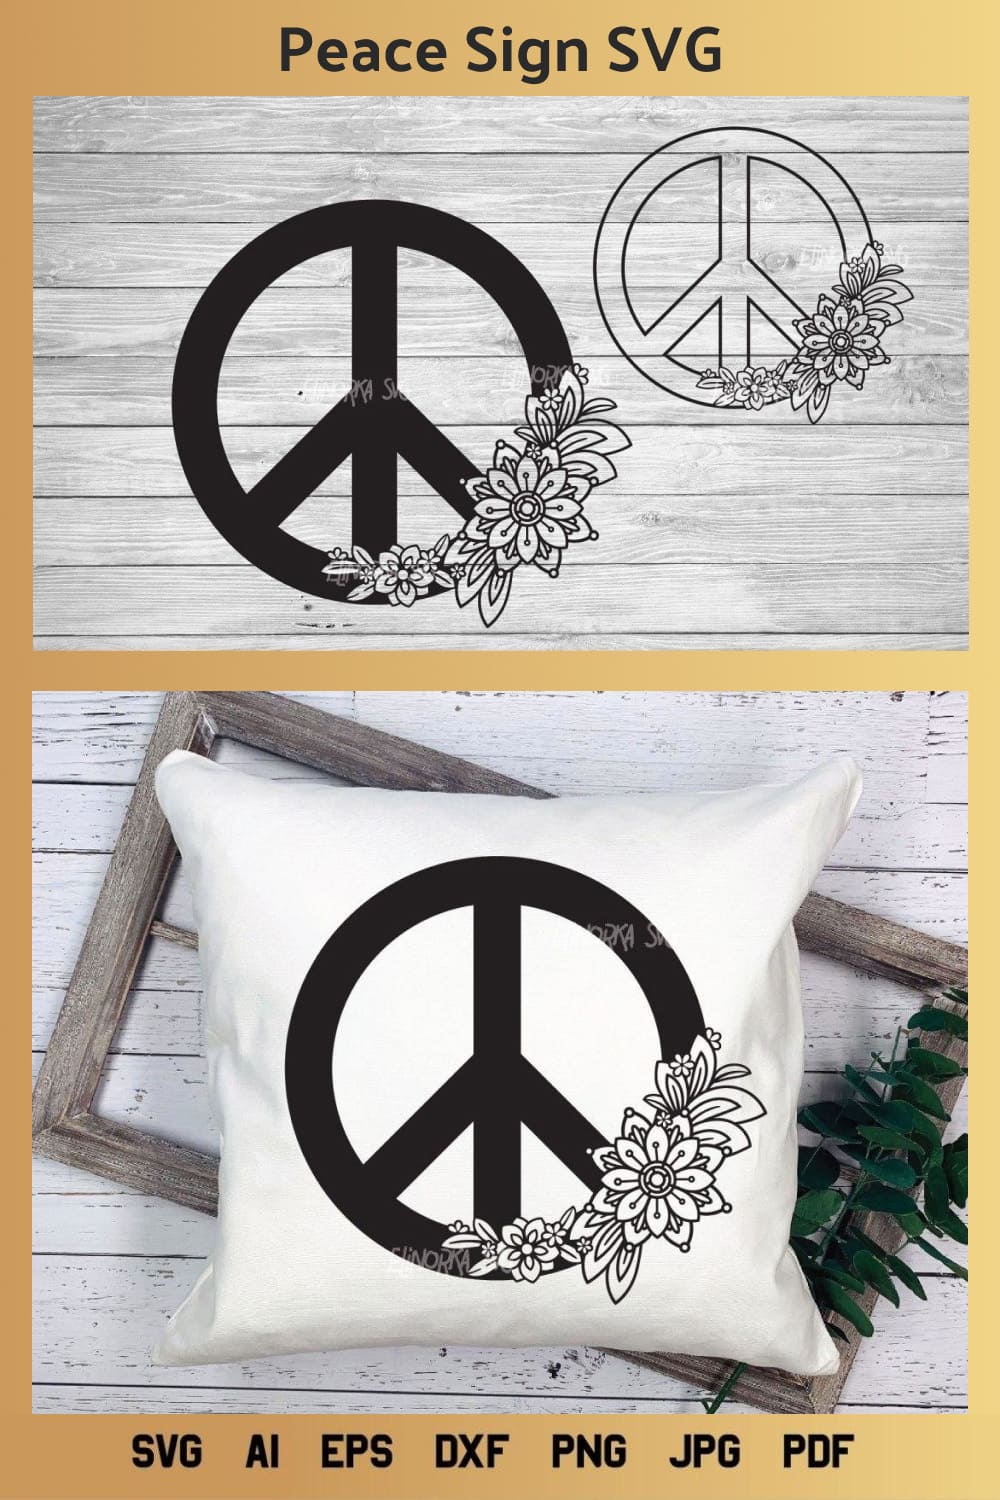 Cool classic collection of peace sign.